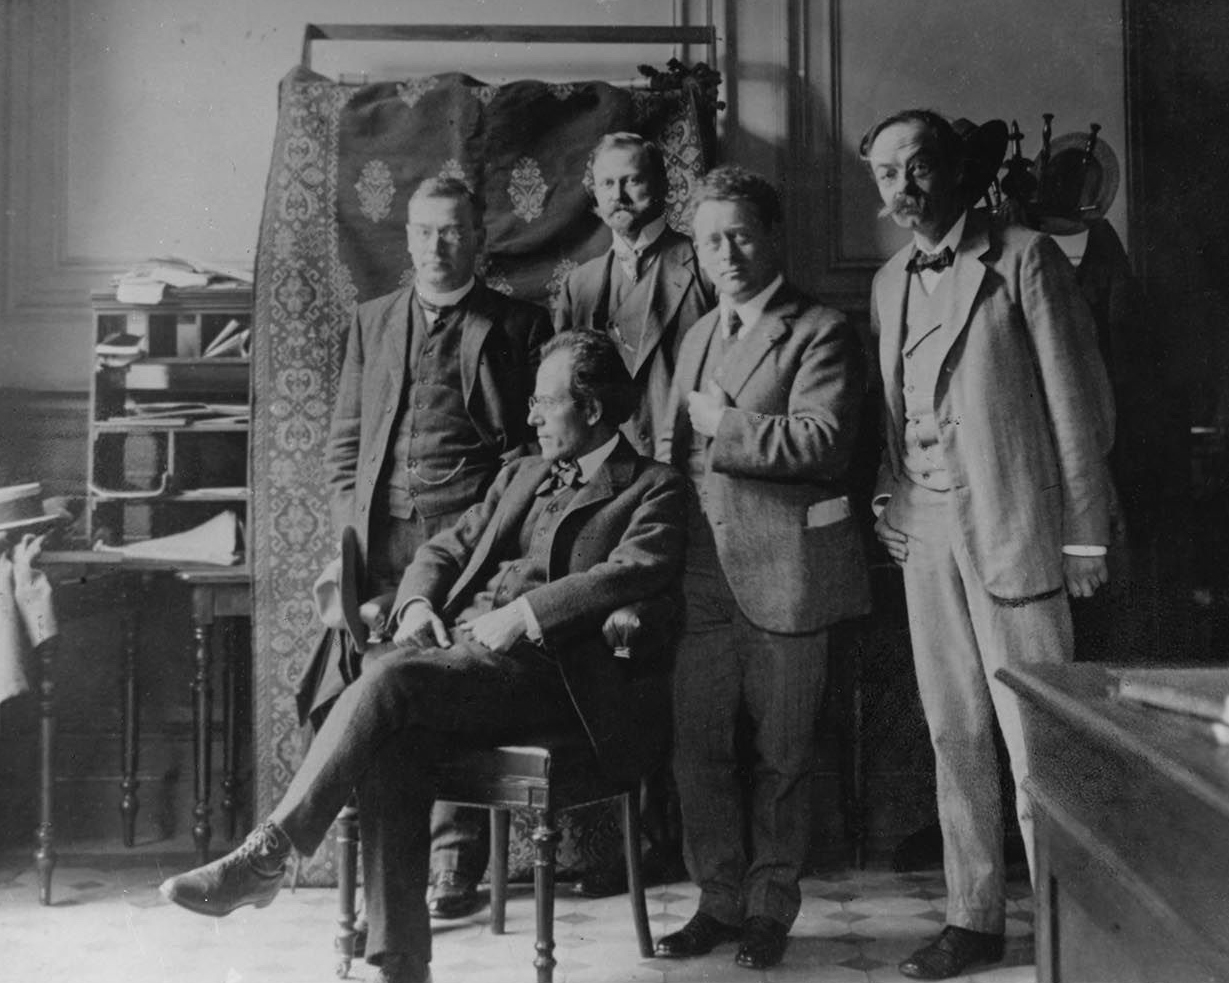 A gathering at the Concertgebouw in 1909: (from left to right) Cornelis Dopper, Gustav Mahler, H. Freijer, Willem Mengelberg and Alphons Diepenbrock 